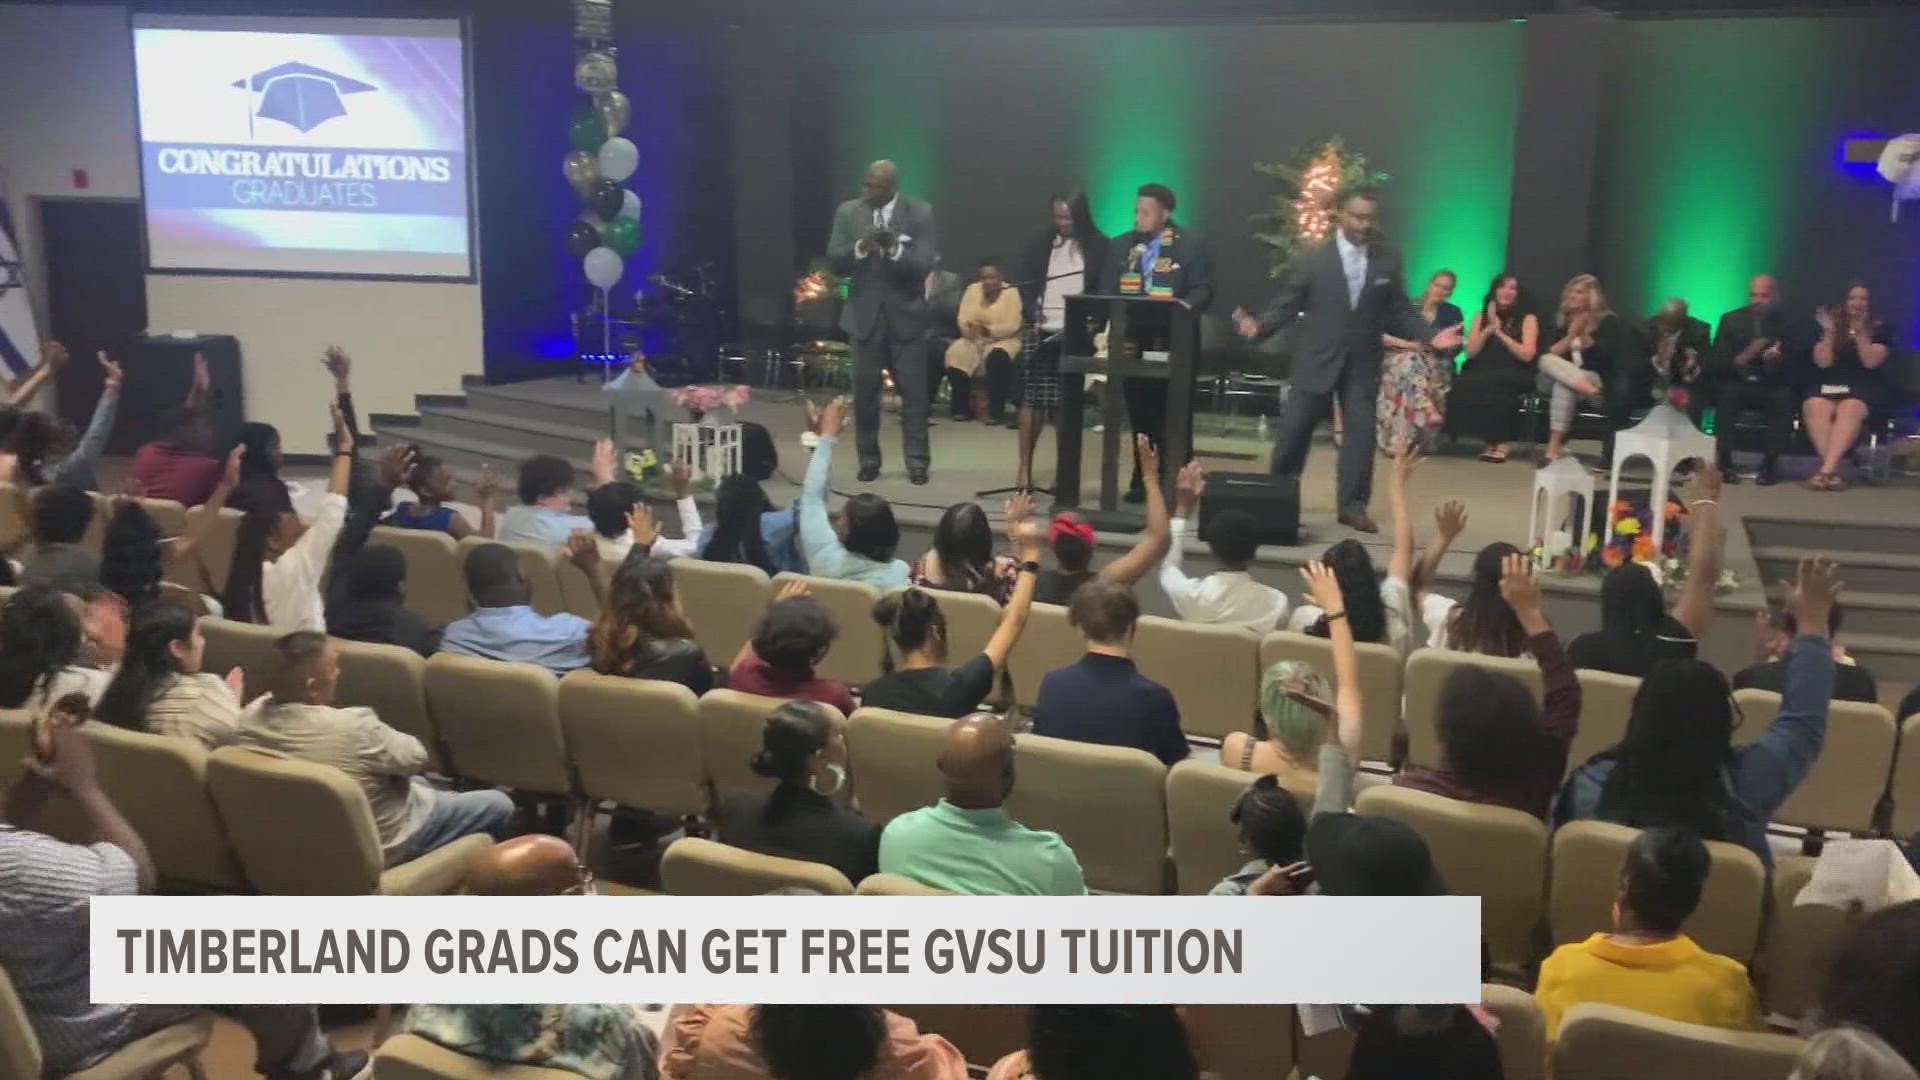 During the ceremony, graduates were told if they finished high school with at least a 2.8 GPA, they would receive a full ride to Grand Valley State University.